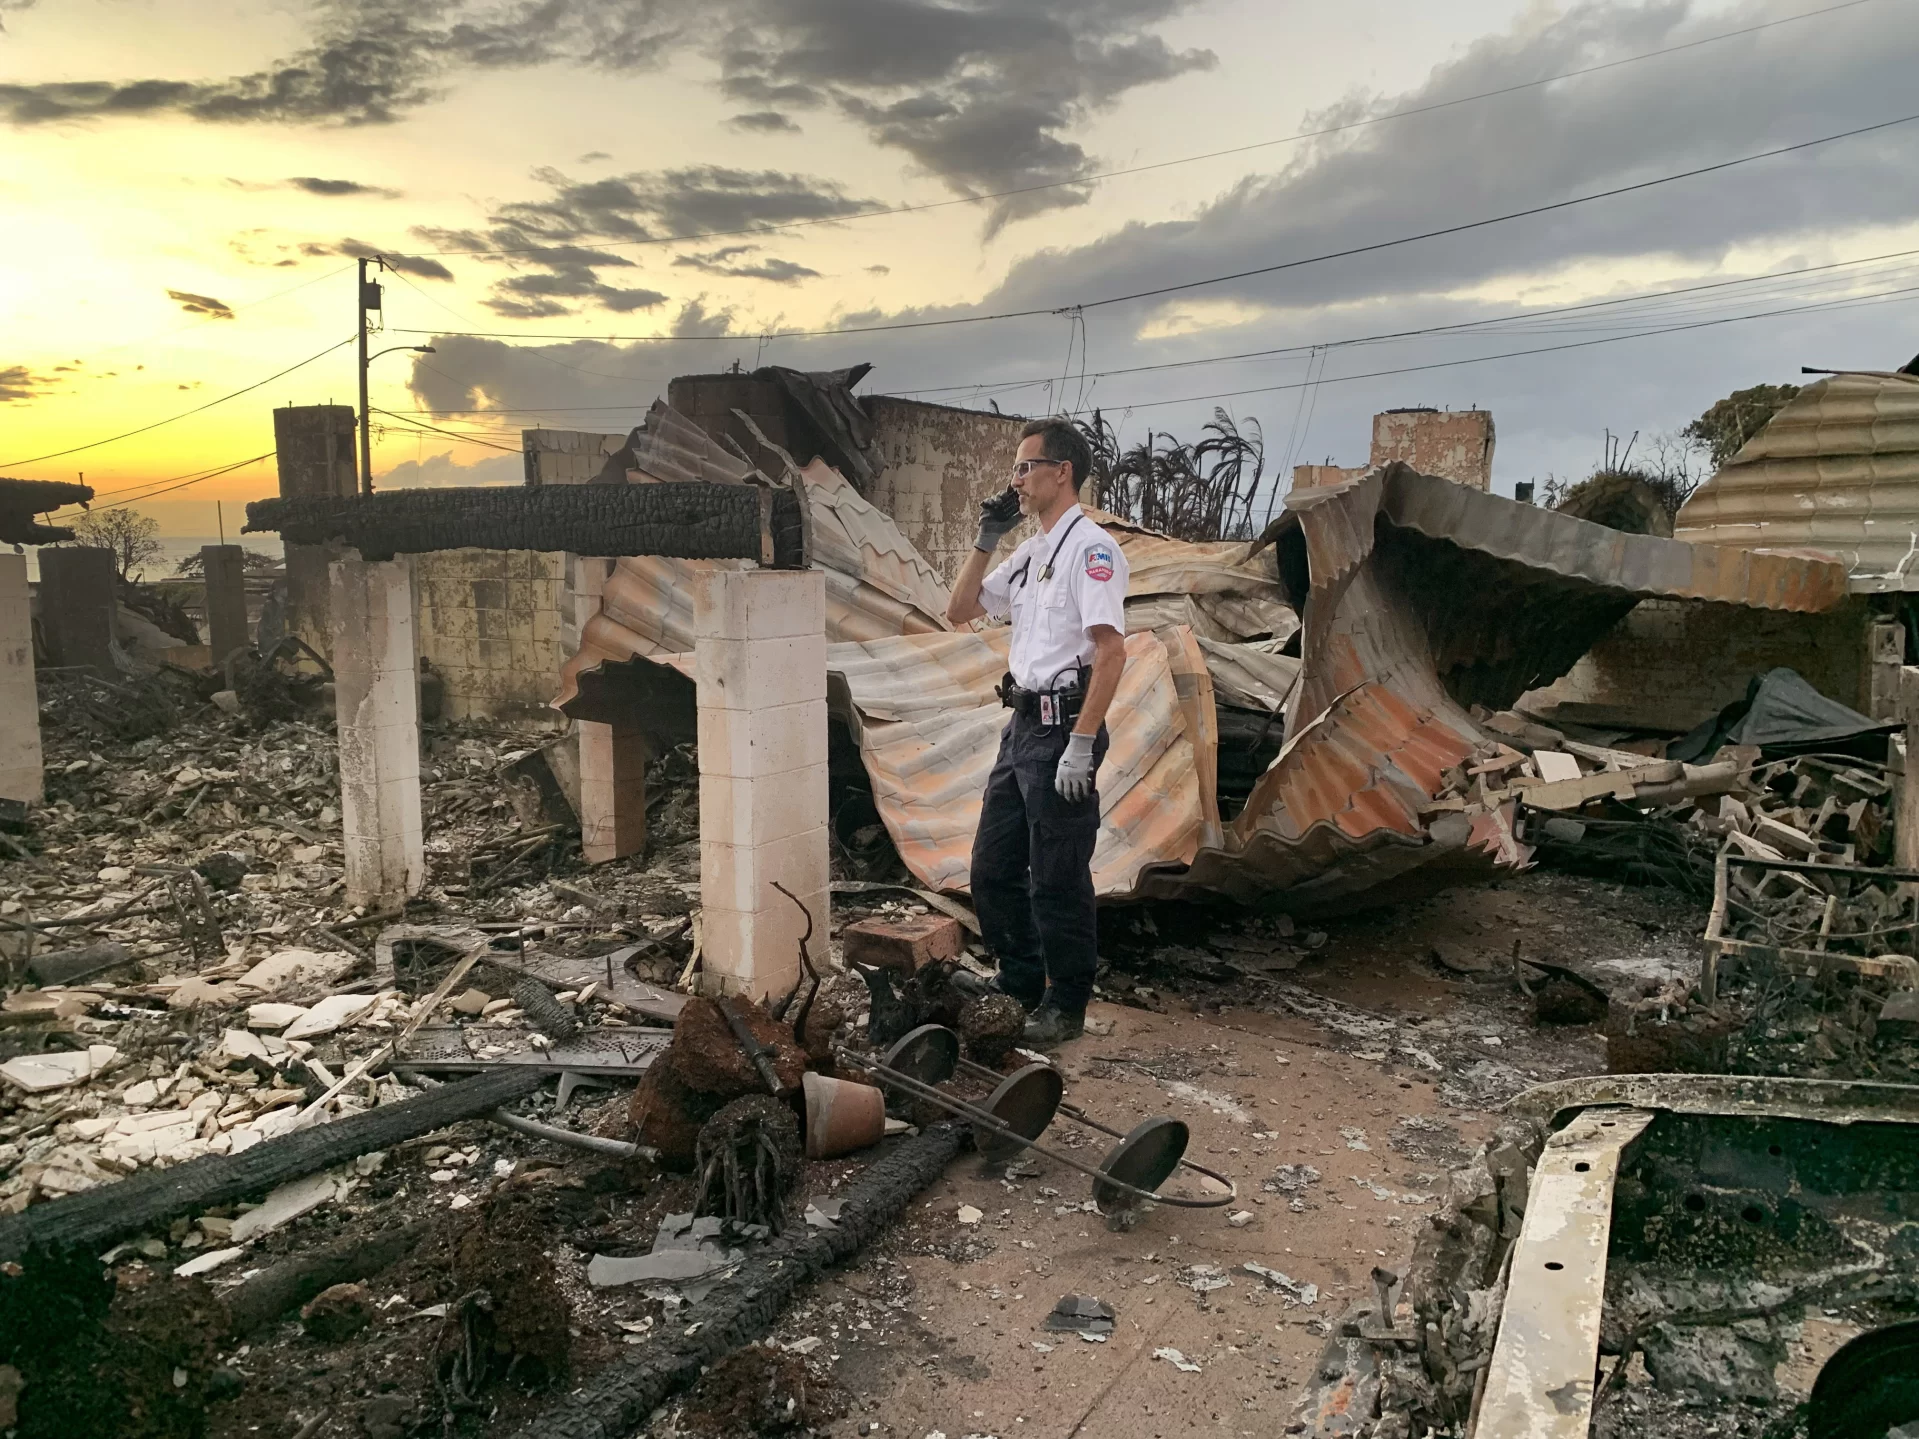 Standing amid the destruction cause by fire on Aug. 10, 2023, David Kingdon ’98 worked on a solo paramedic Special Response Unit in Ma’alaea, Maui,  on the front line helping to treat and transport burn victims during the fires. 